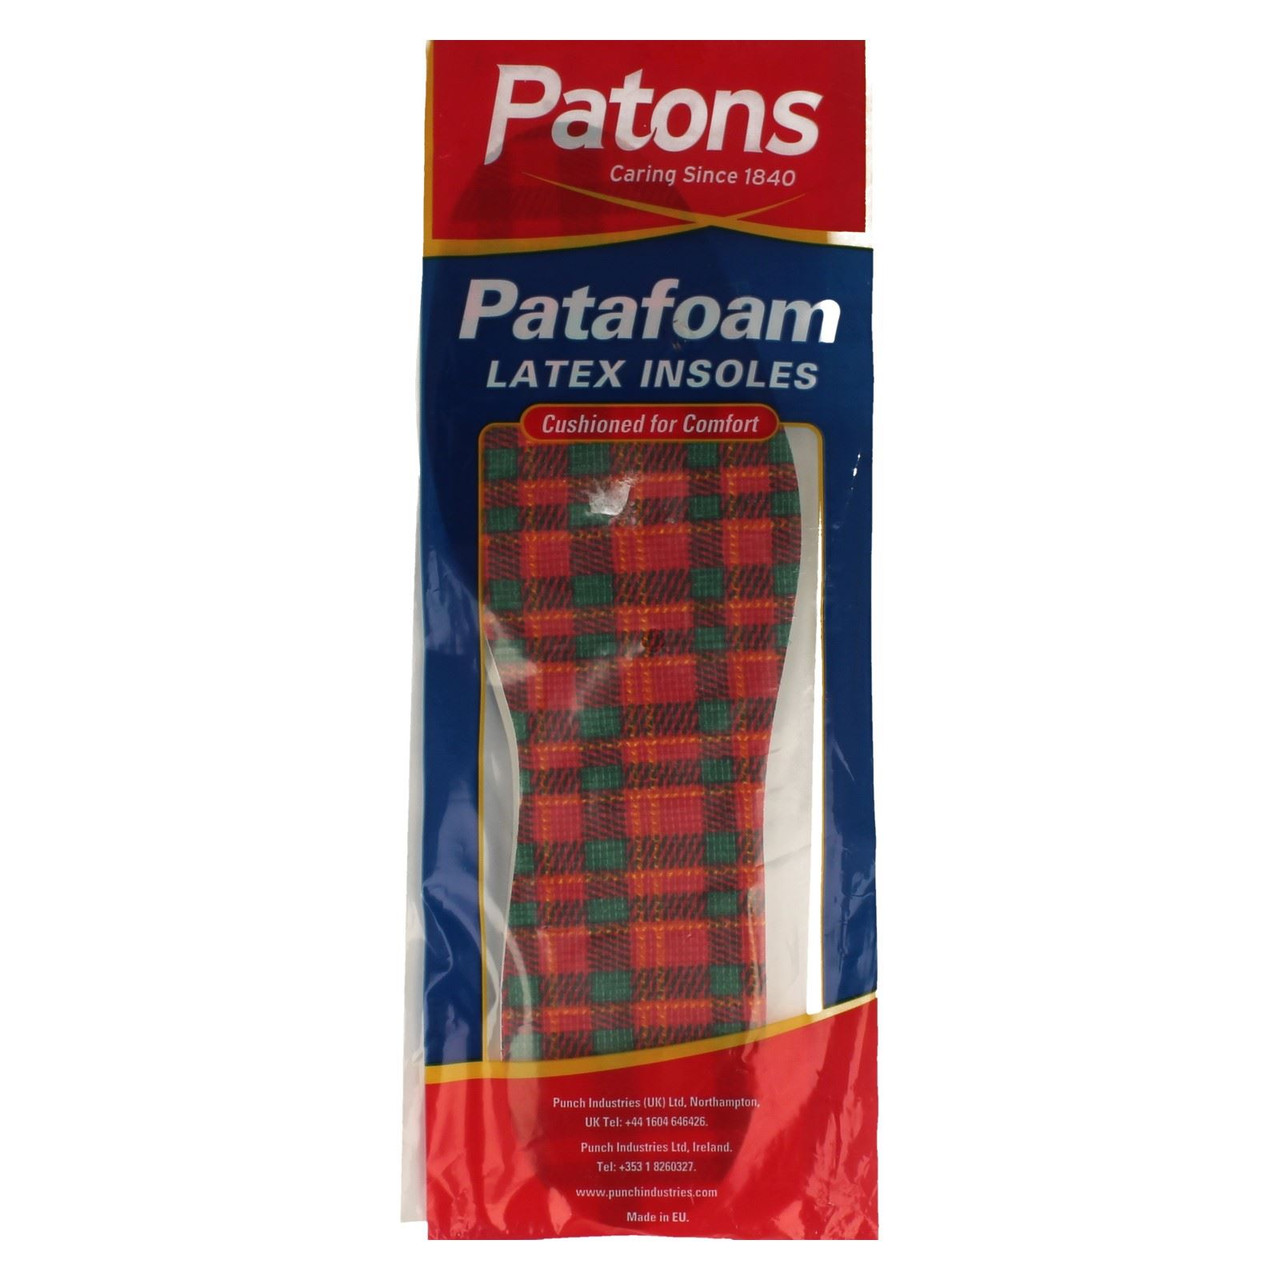 Patons Patafoam Latex Insoles Mens Or Ladies Cushioned For Comfort/Breathable. 